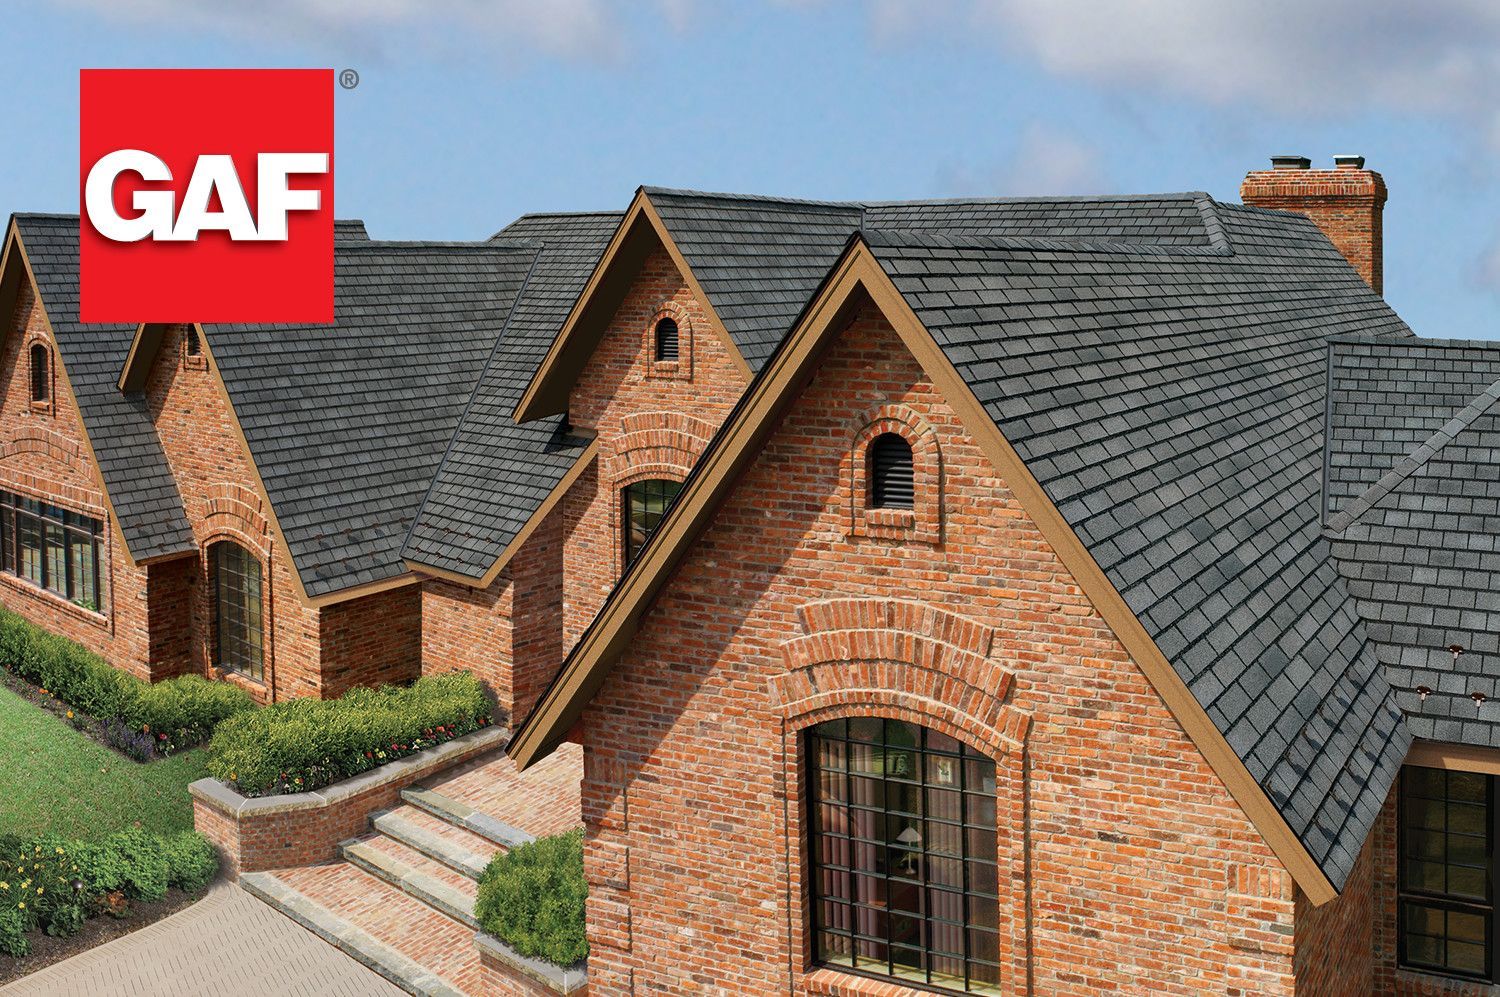 GAF Roofing | Trust Big Fish To Install Your GAF Roofing Shingles